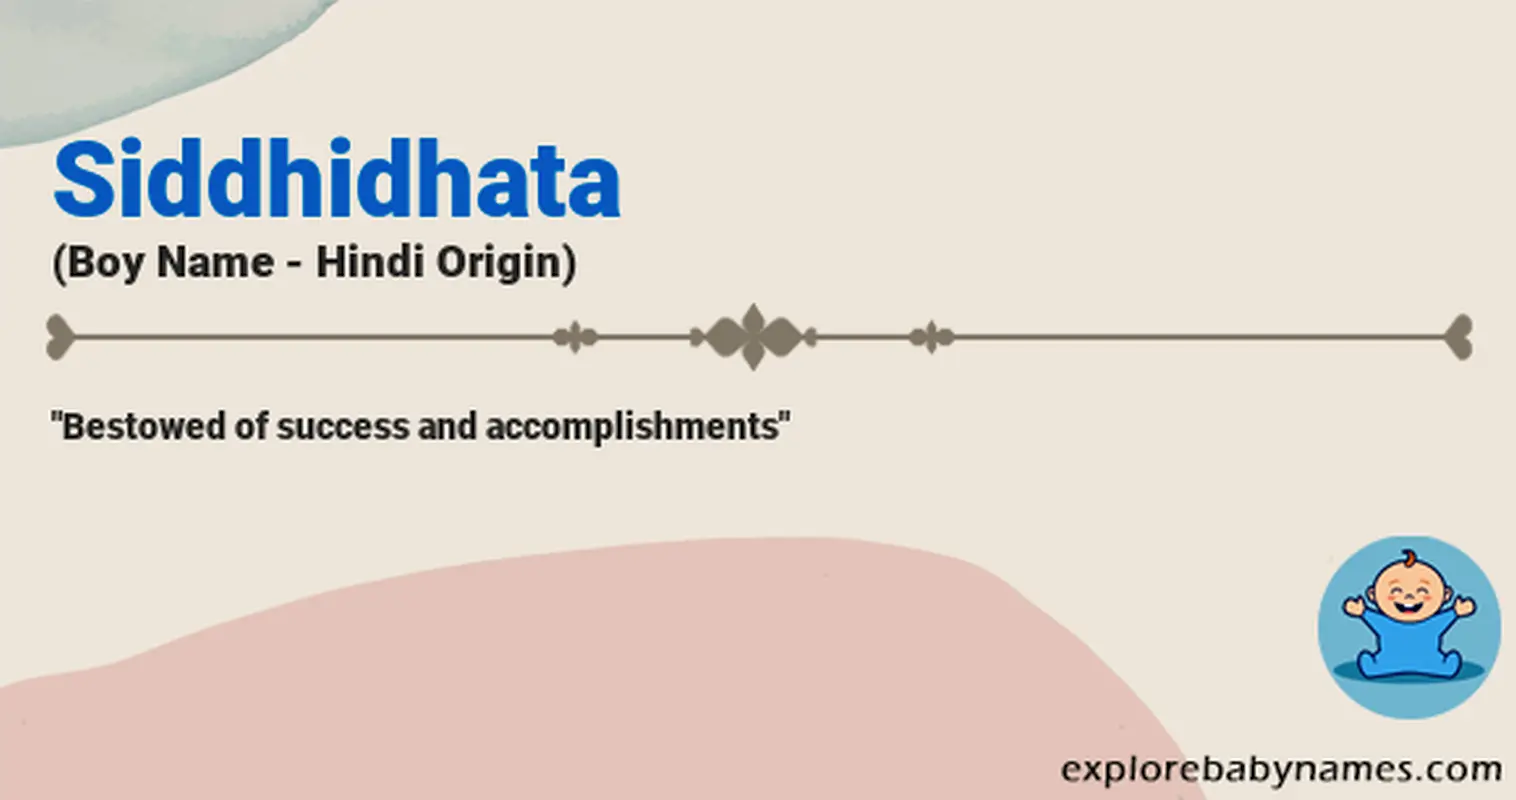 Meaning of Siddhidhata